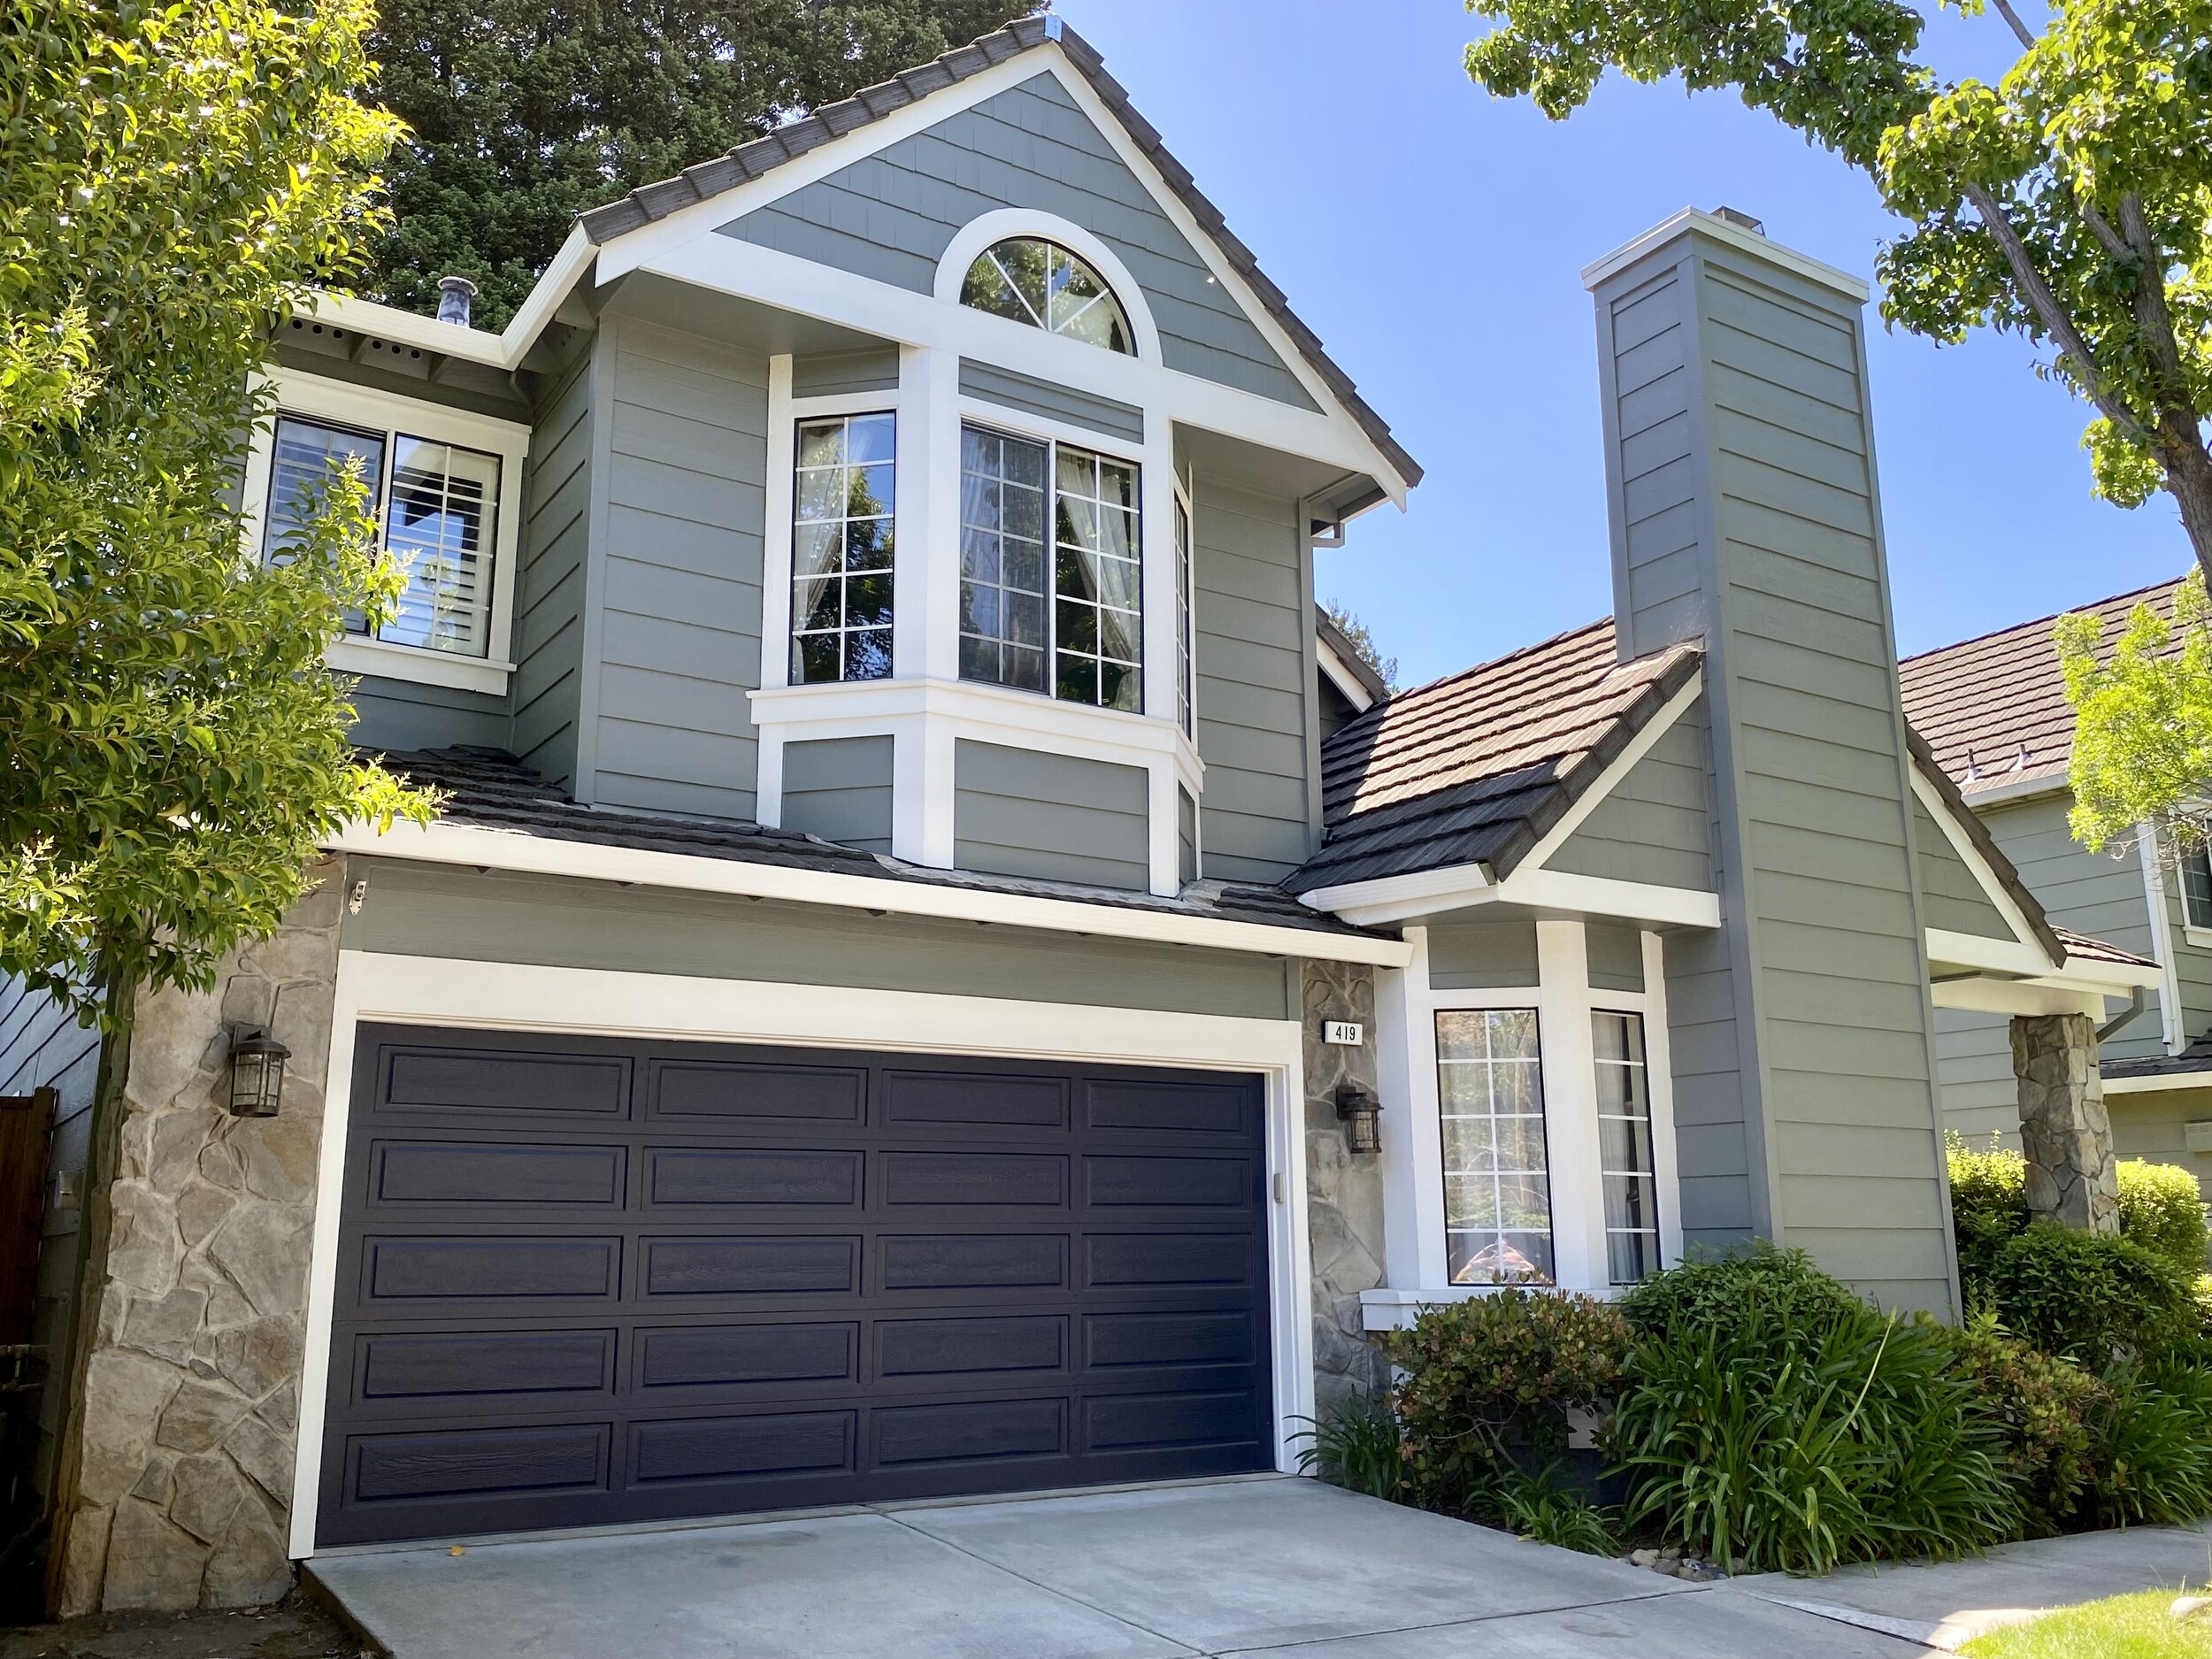 $2,358,000 | 419 Camberly, Redwood City